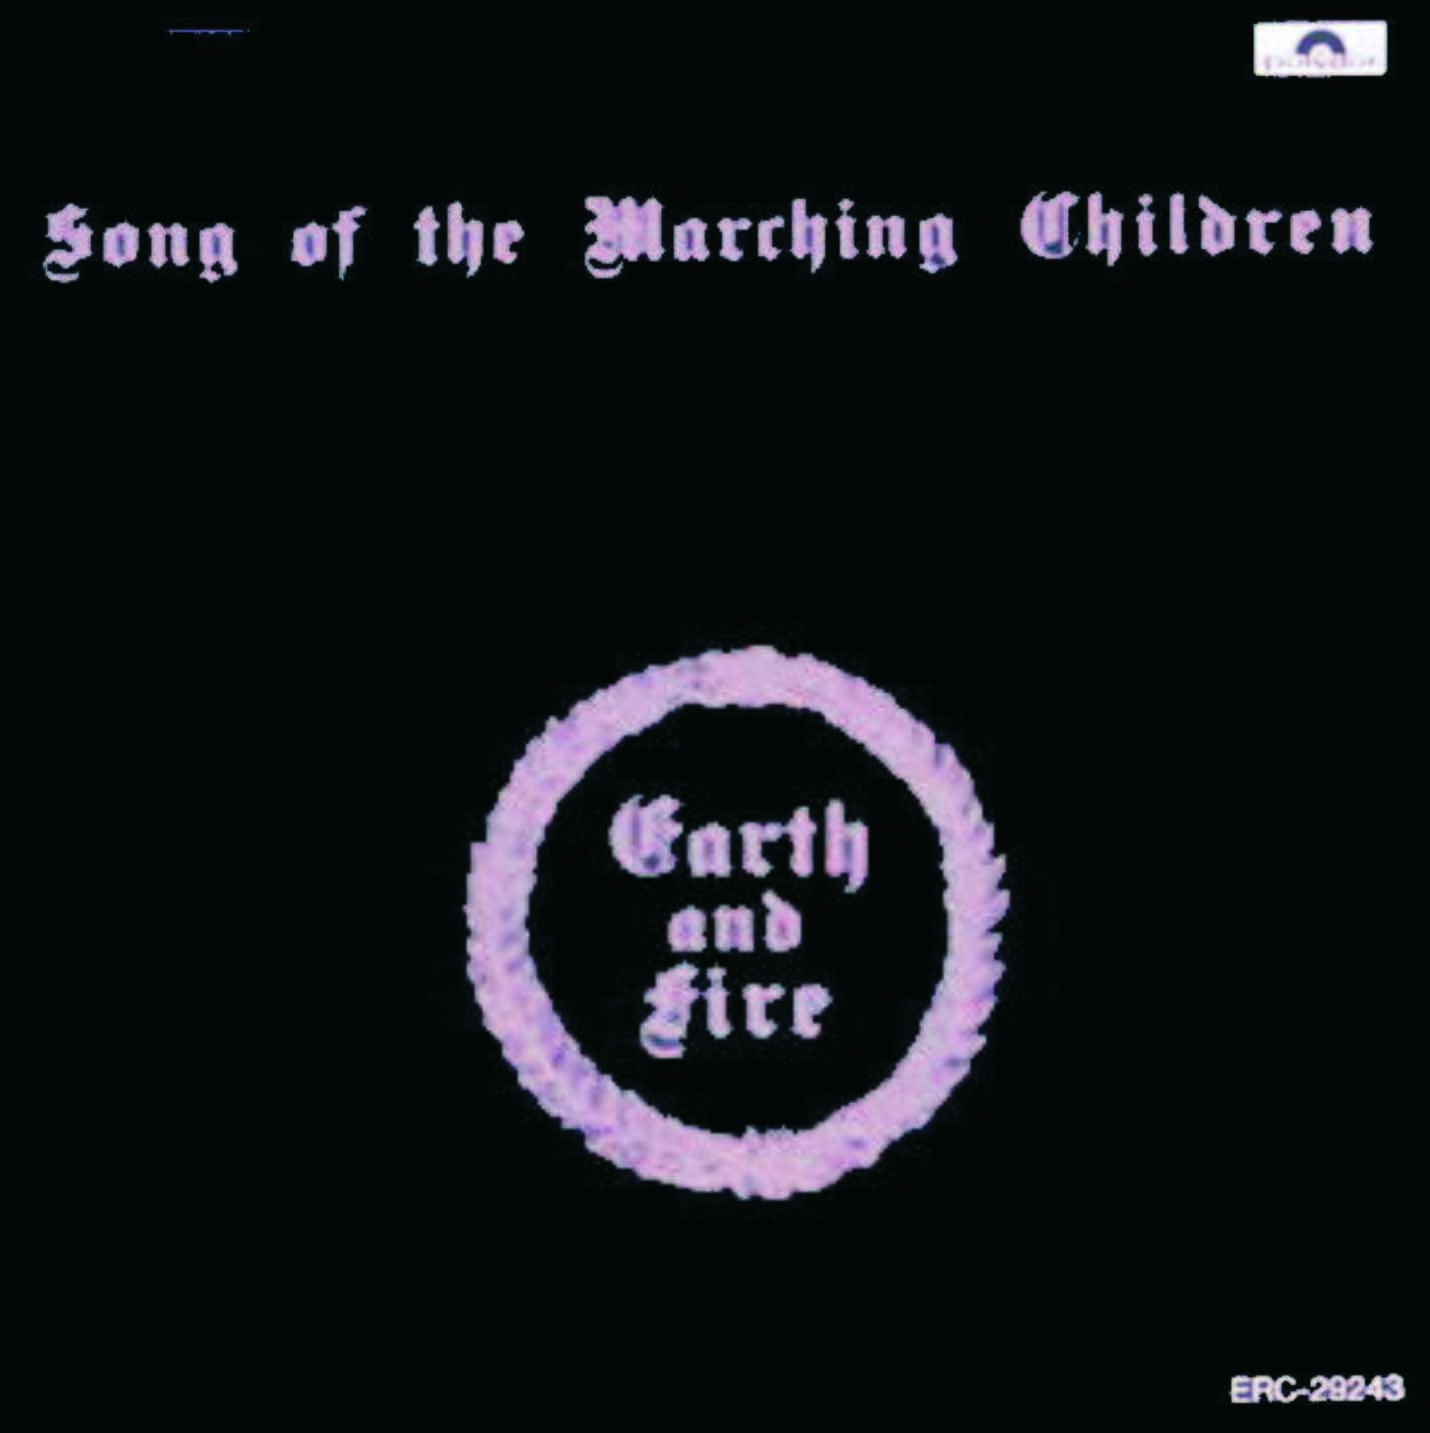 [Earth+&+Fire+Song+of+the+marching+children+FRONT.jpg]